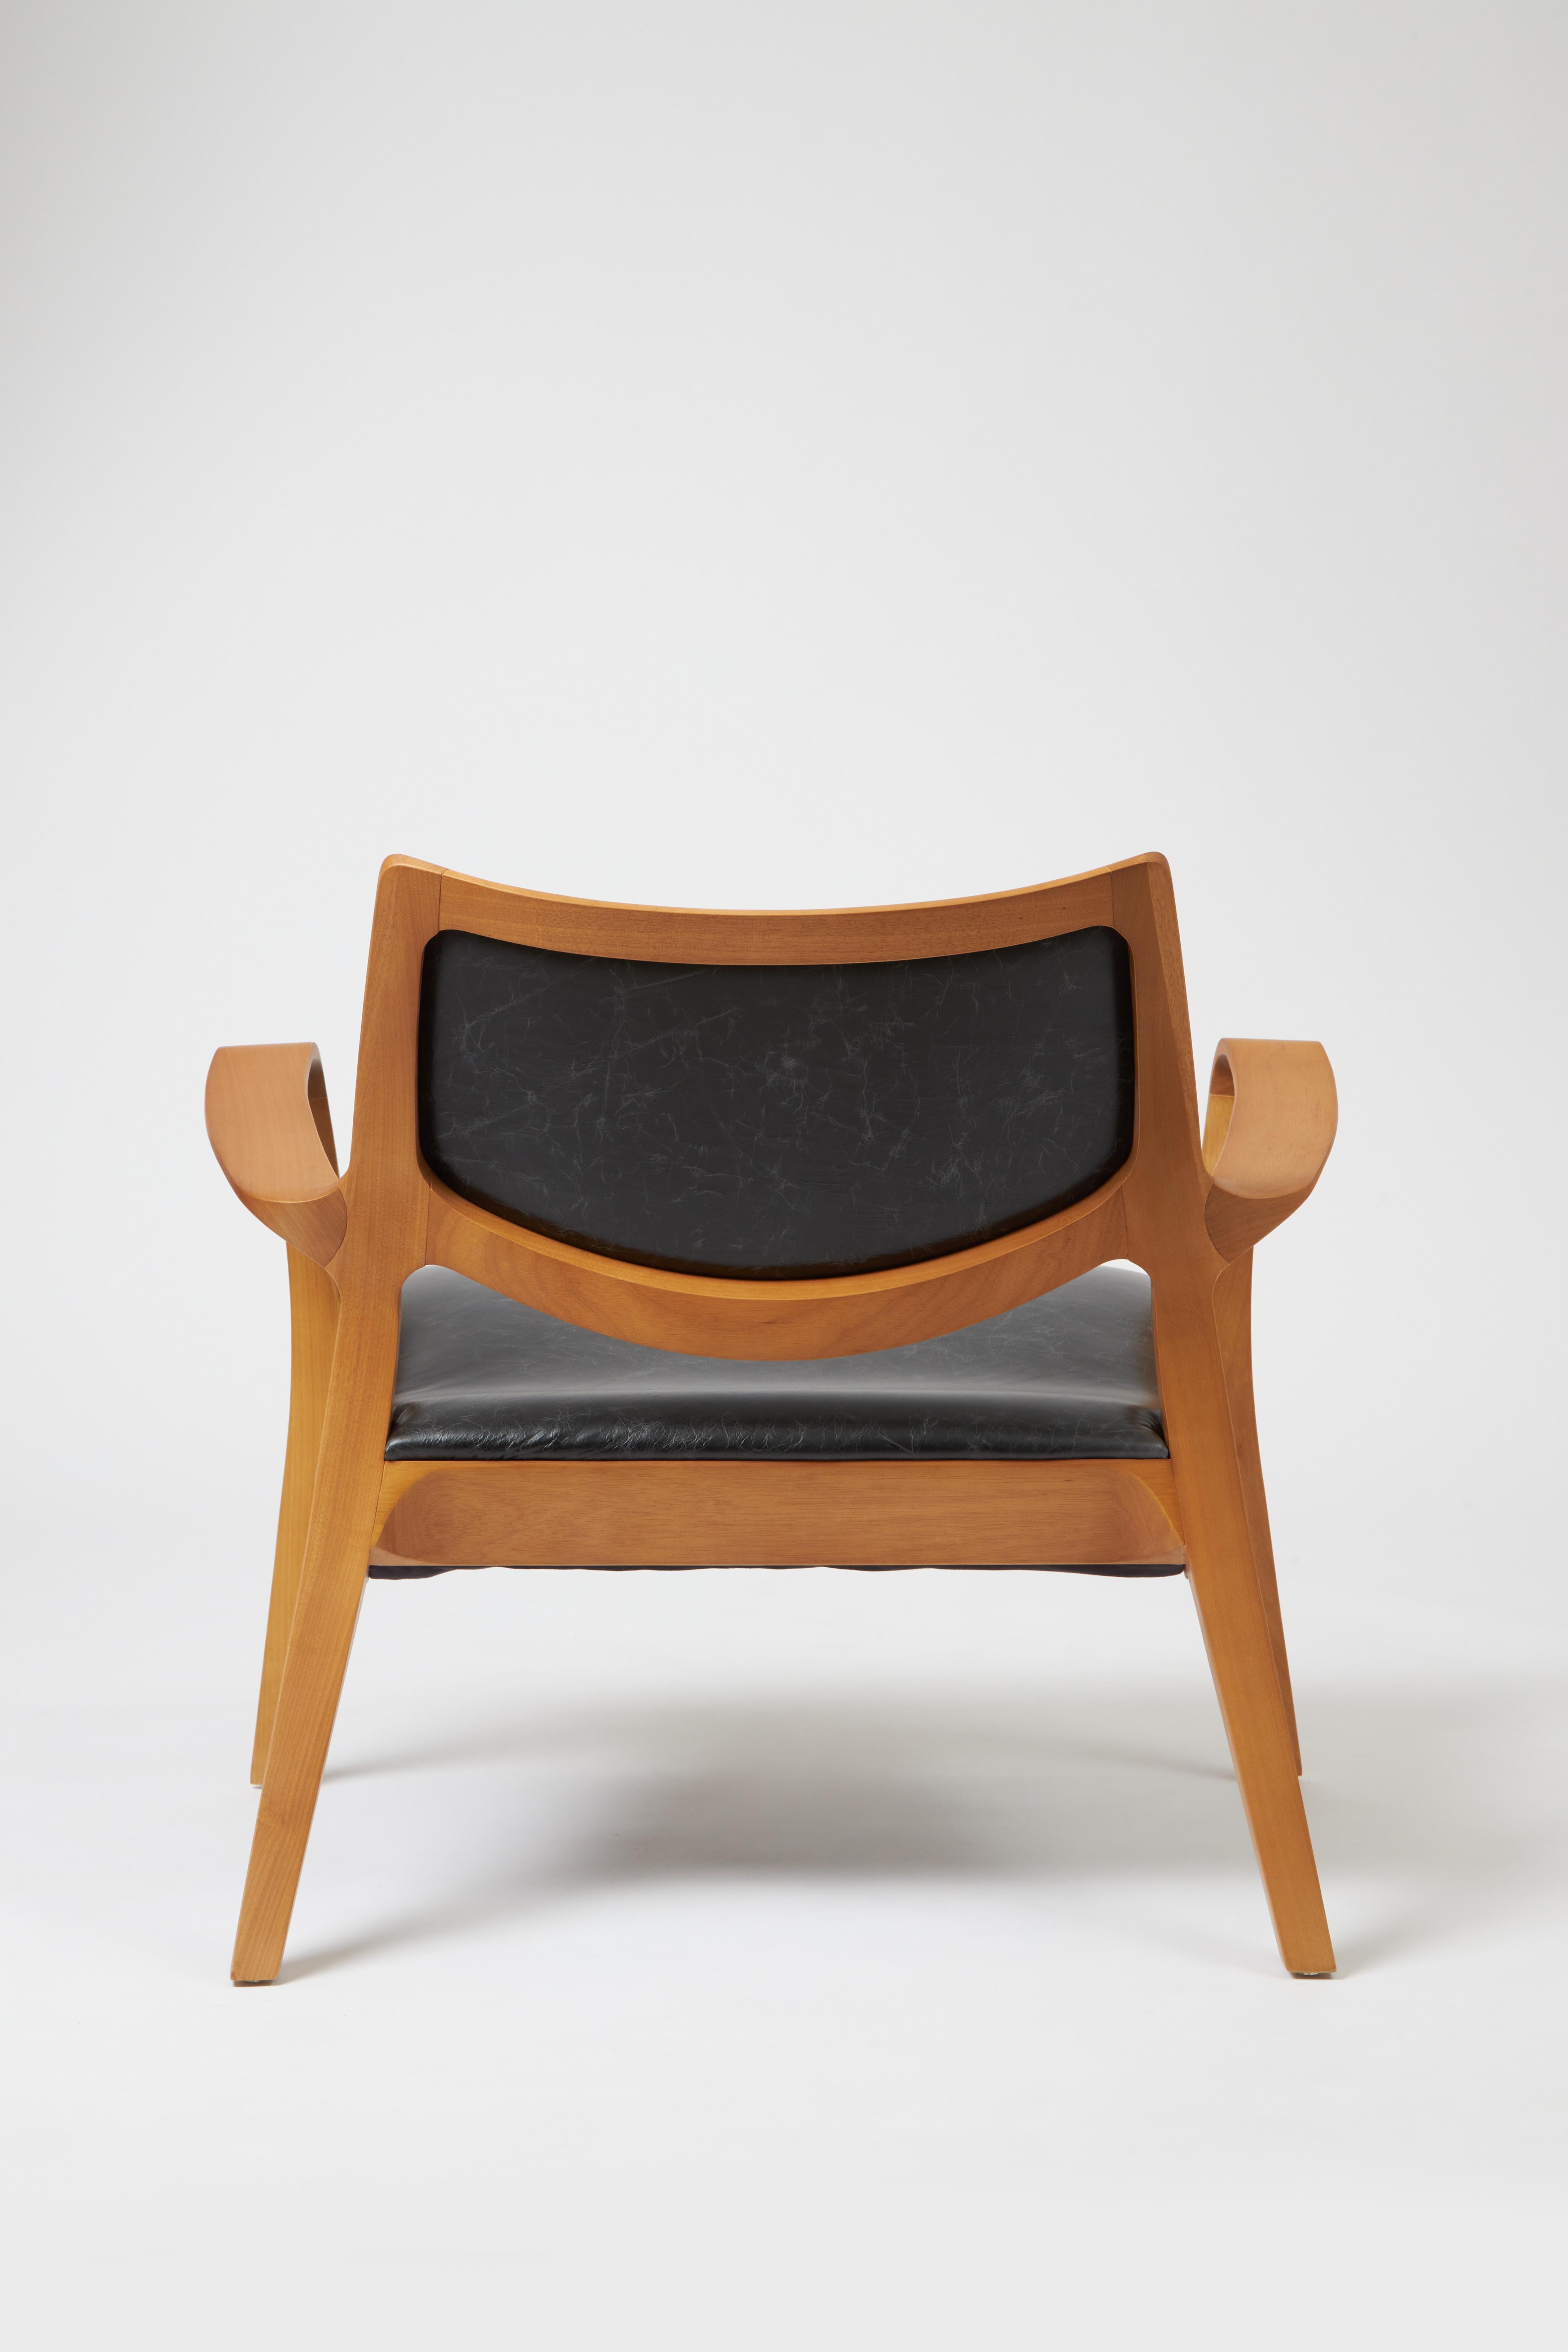 Brazilian Modern Style Aurora armchair Sculpted in solid wood, leather seat and back For Sale